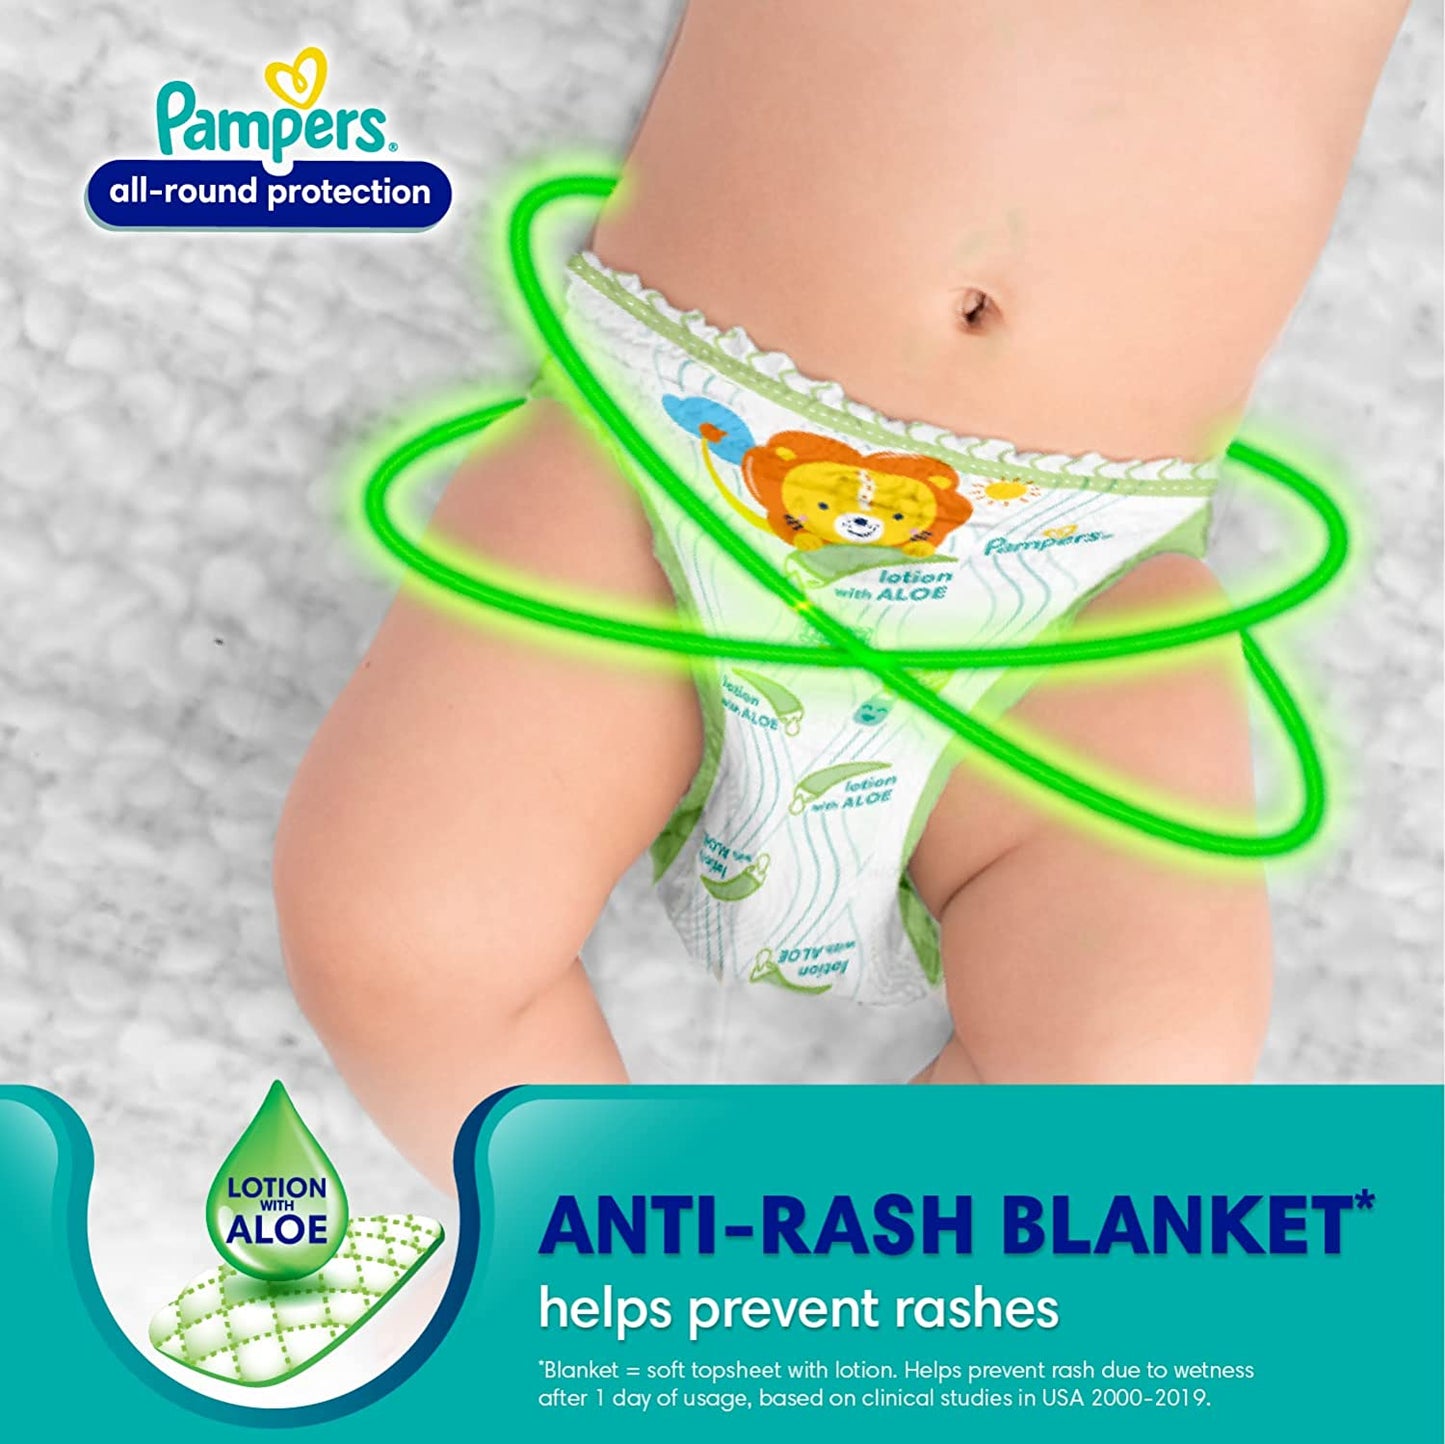 Pampers Diaper Pants (XXL)- (28 Pieces)